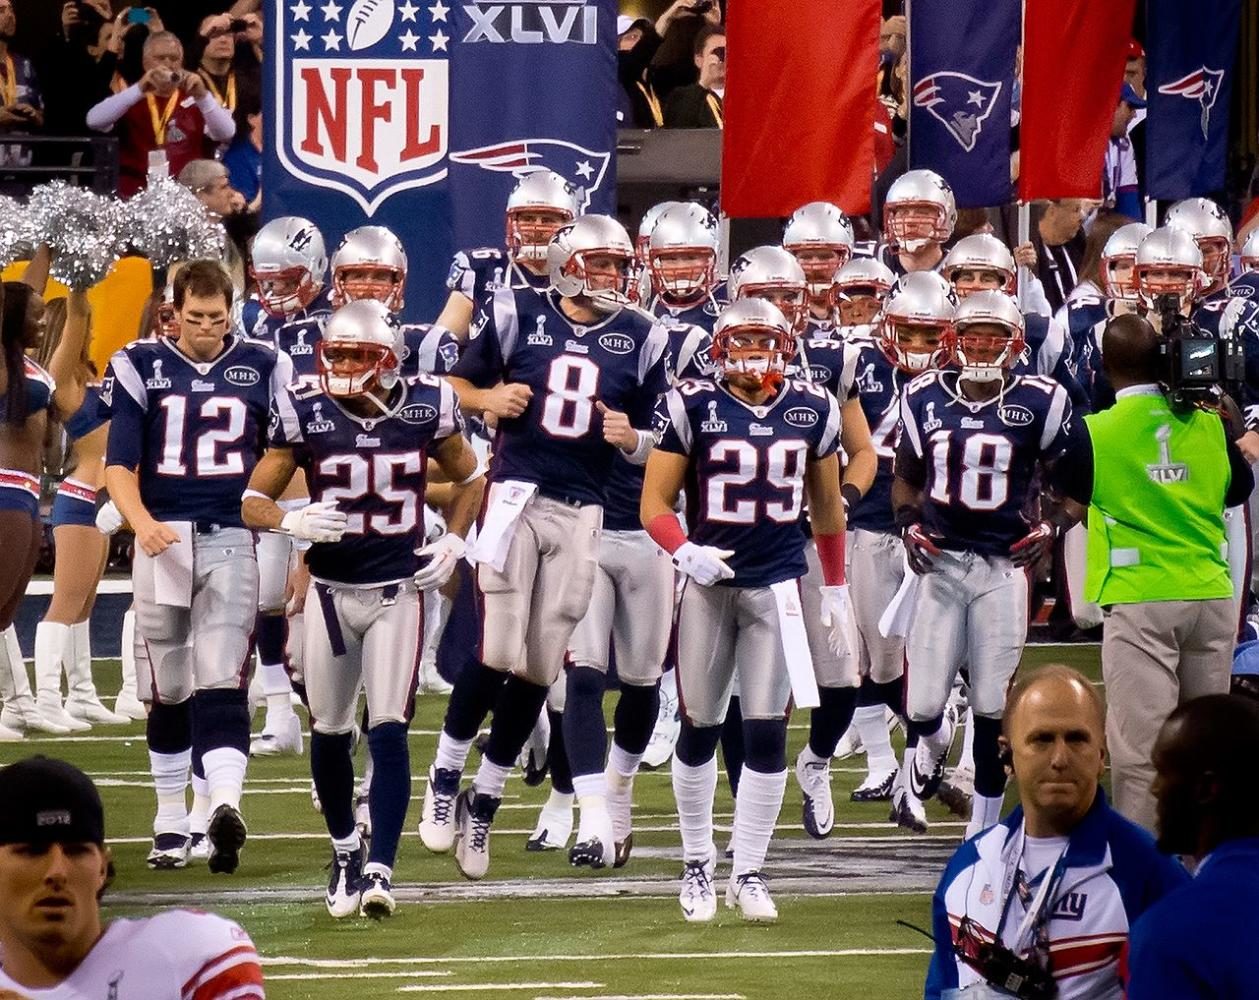 Have the Patriots become more popular over the years?